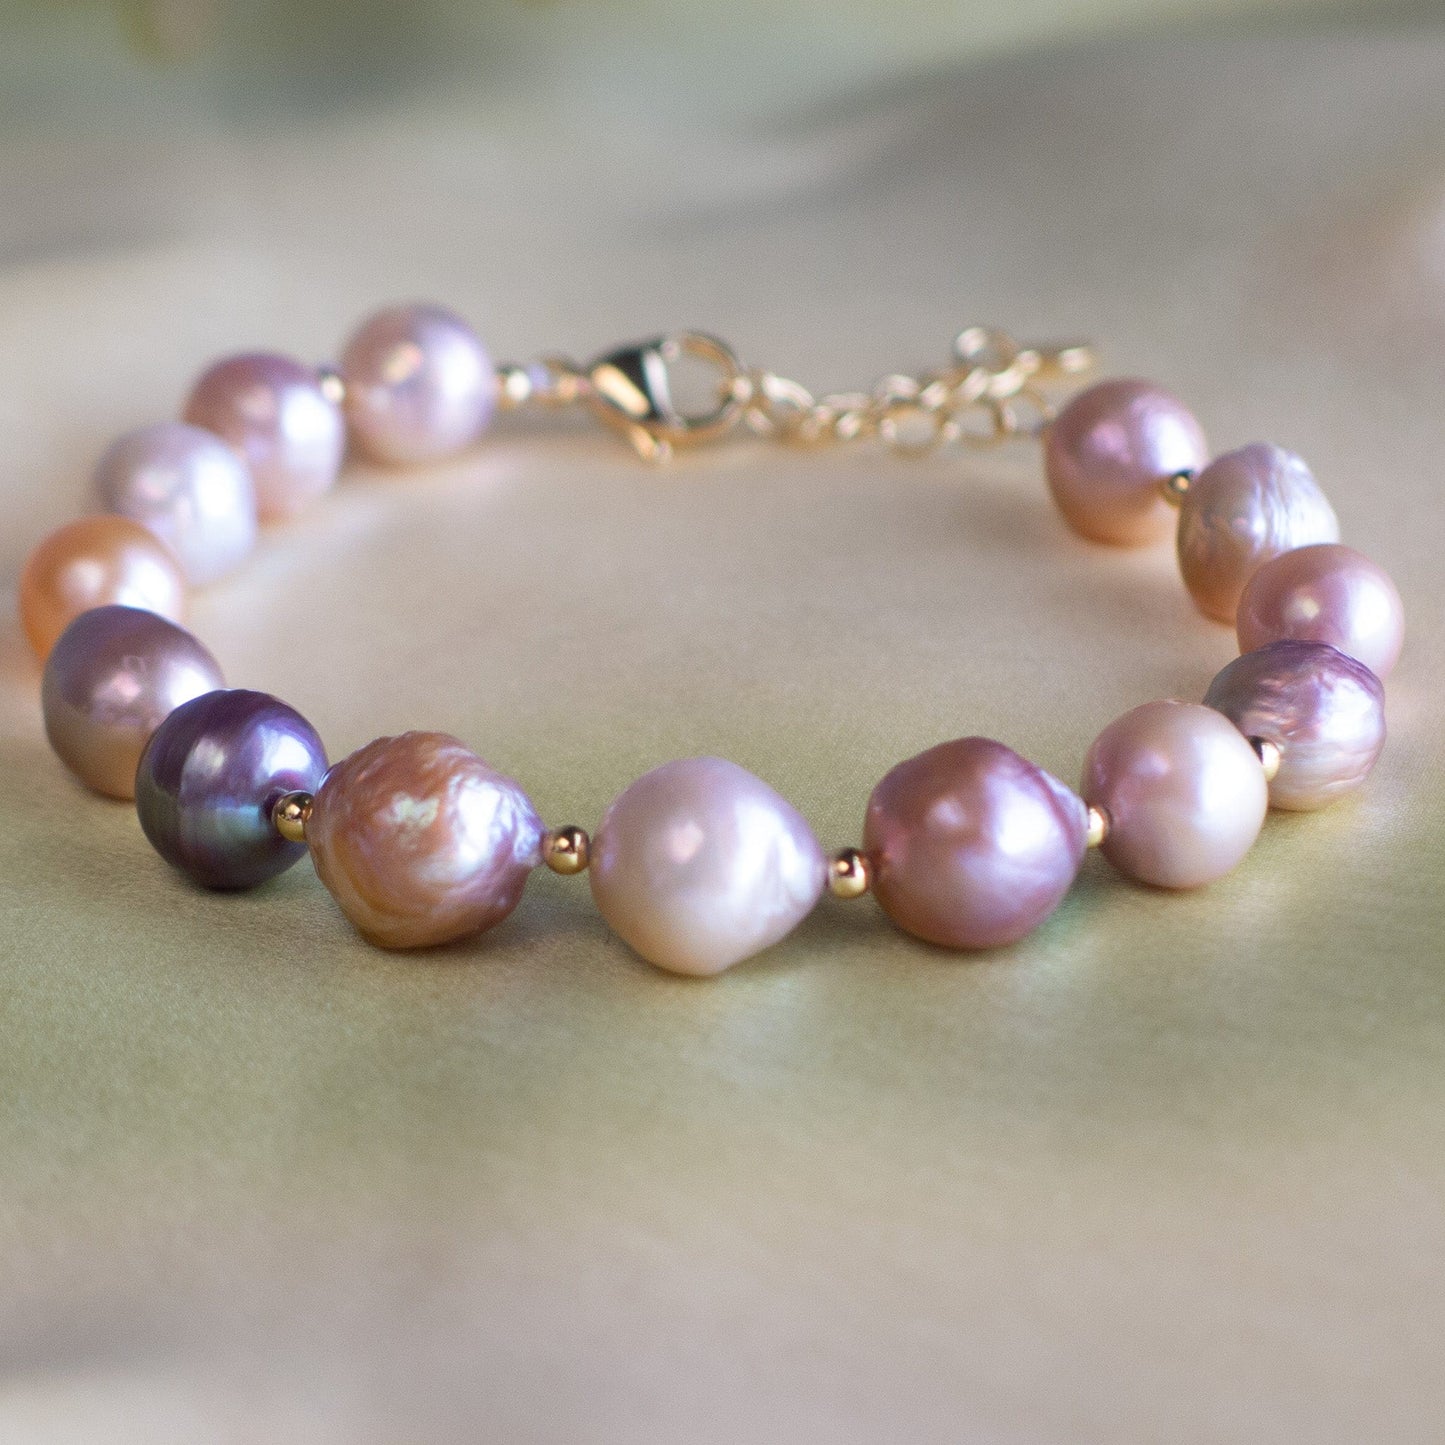 Cheekoo's Handcrafted Multicolor Cultured Freshwater Baroque Pearl Bracelet with Gold Finish Chain and Beads, 10 mm Pearl, 7.5 Inch Long